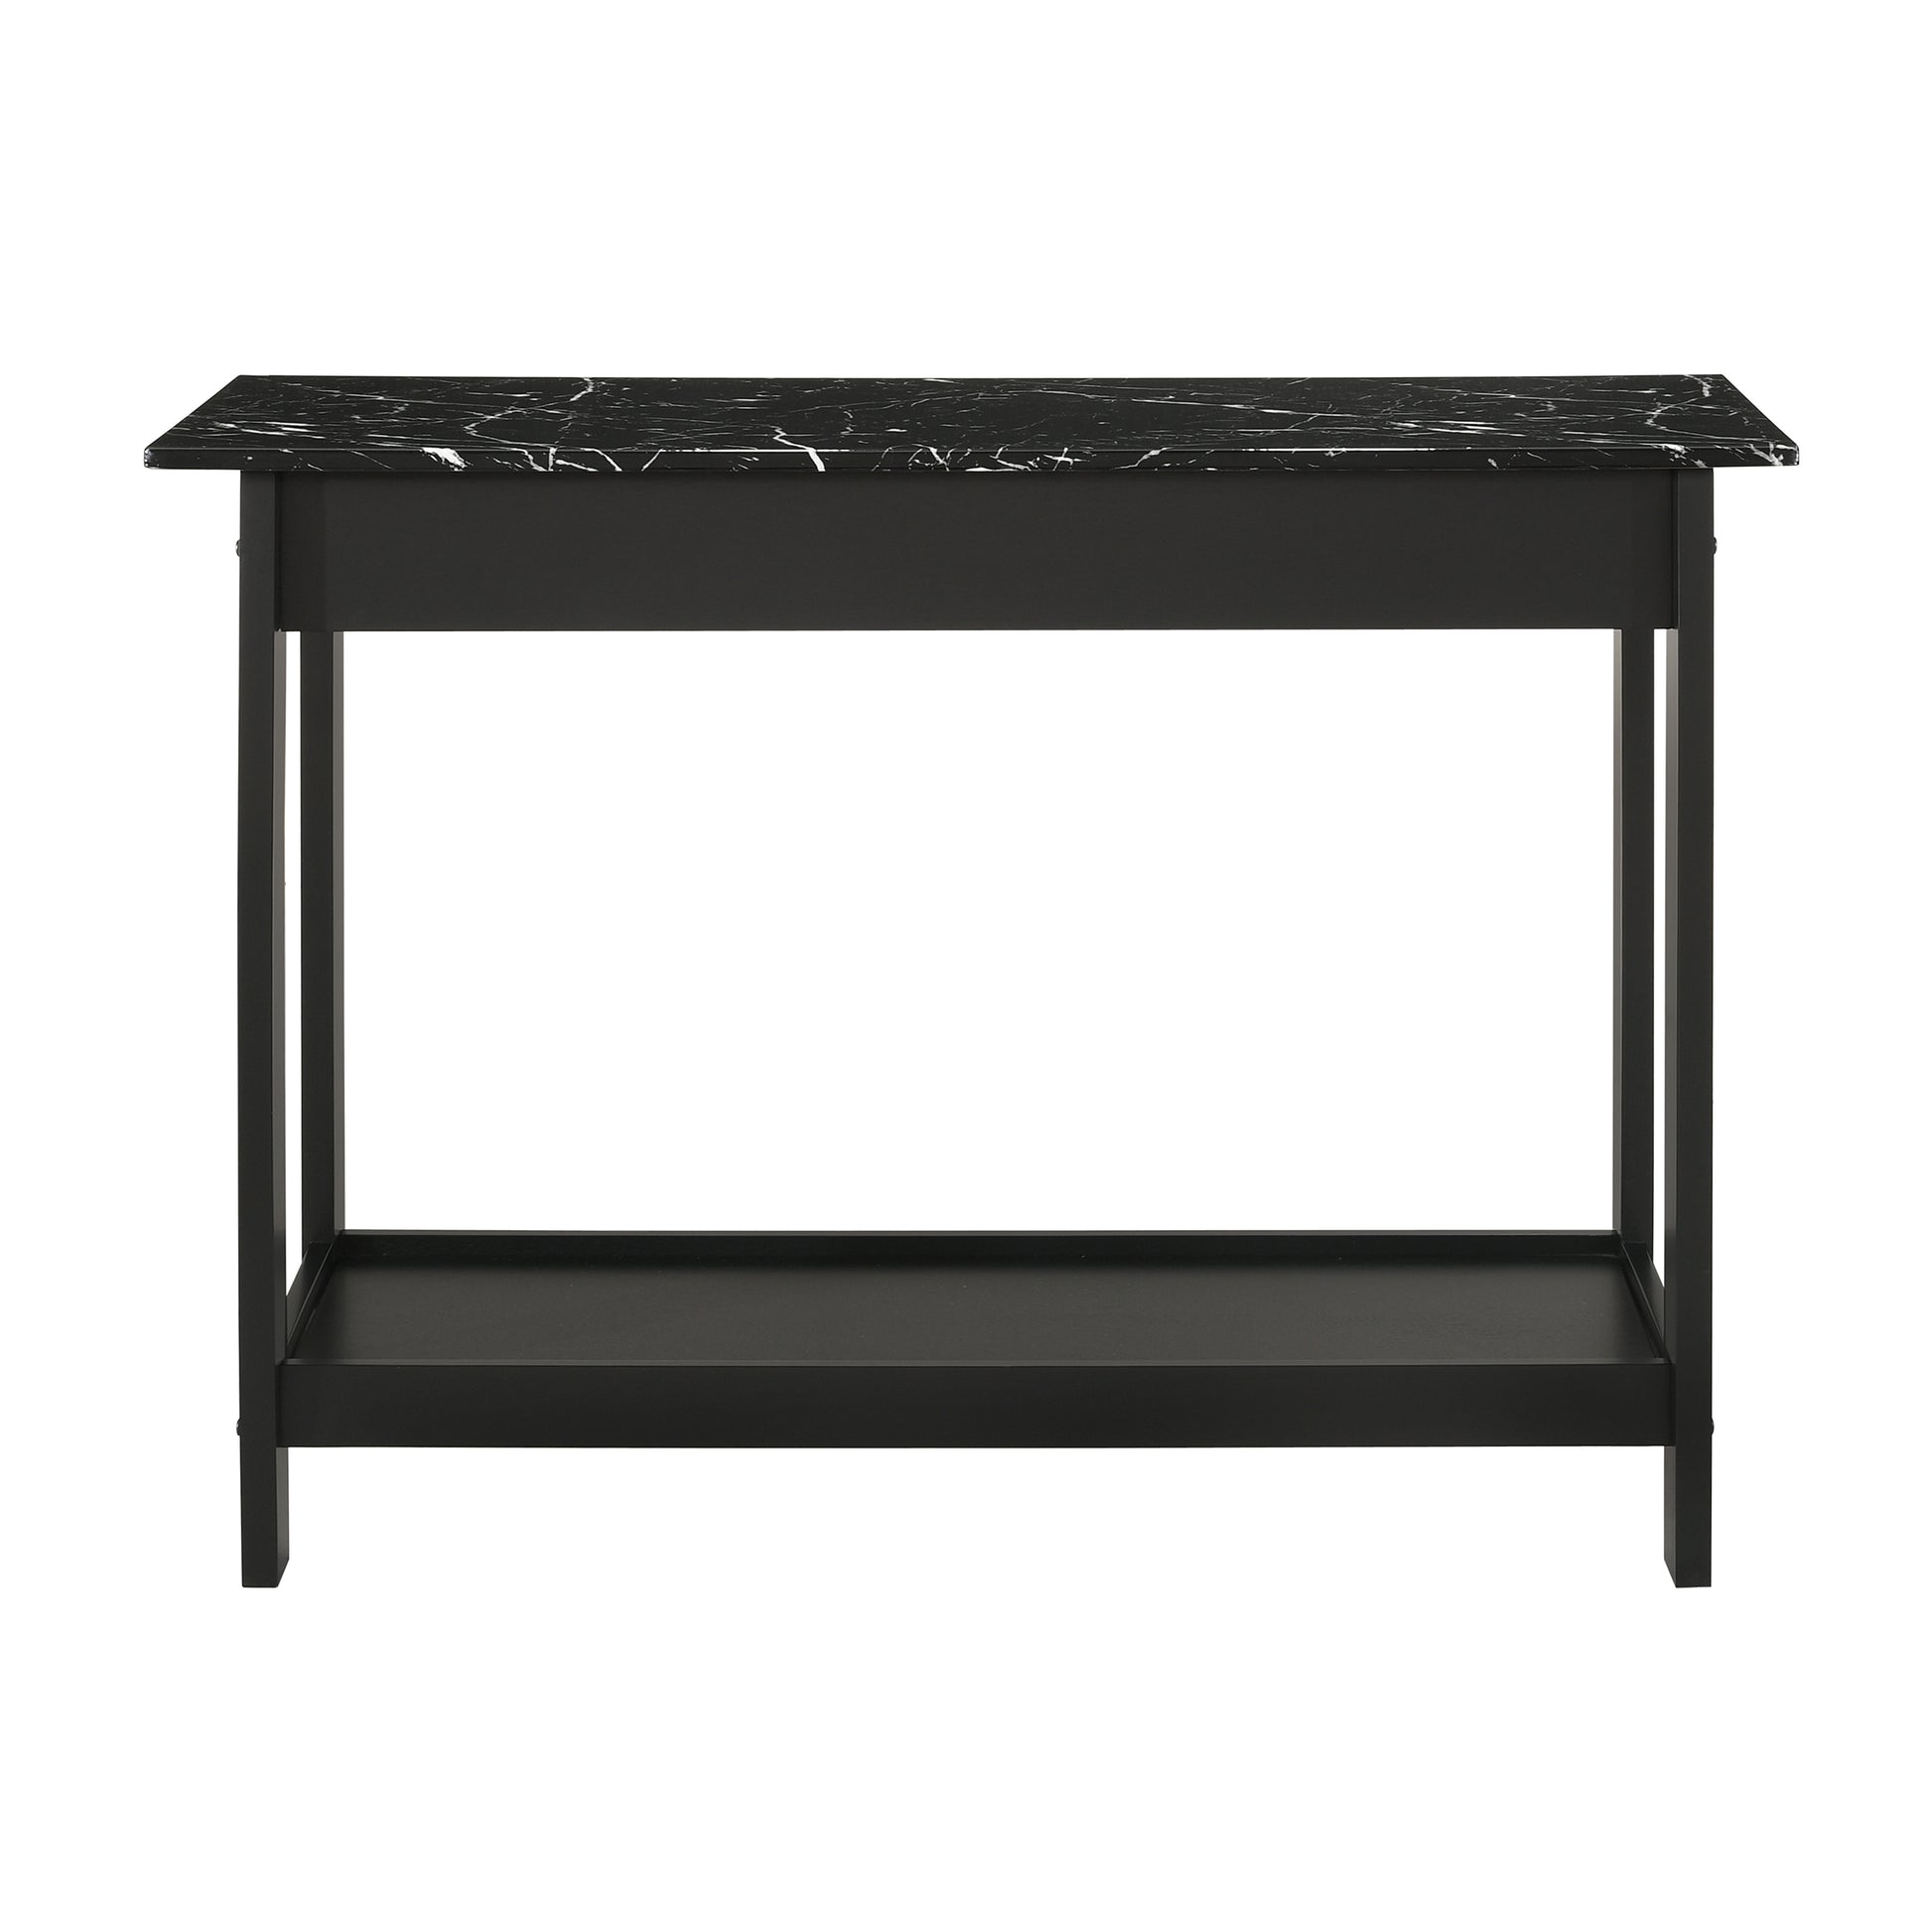 Front-facing back view of a modern black and faux marble one-drawer console table with a lower shelf in a living area with accessories